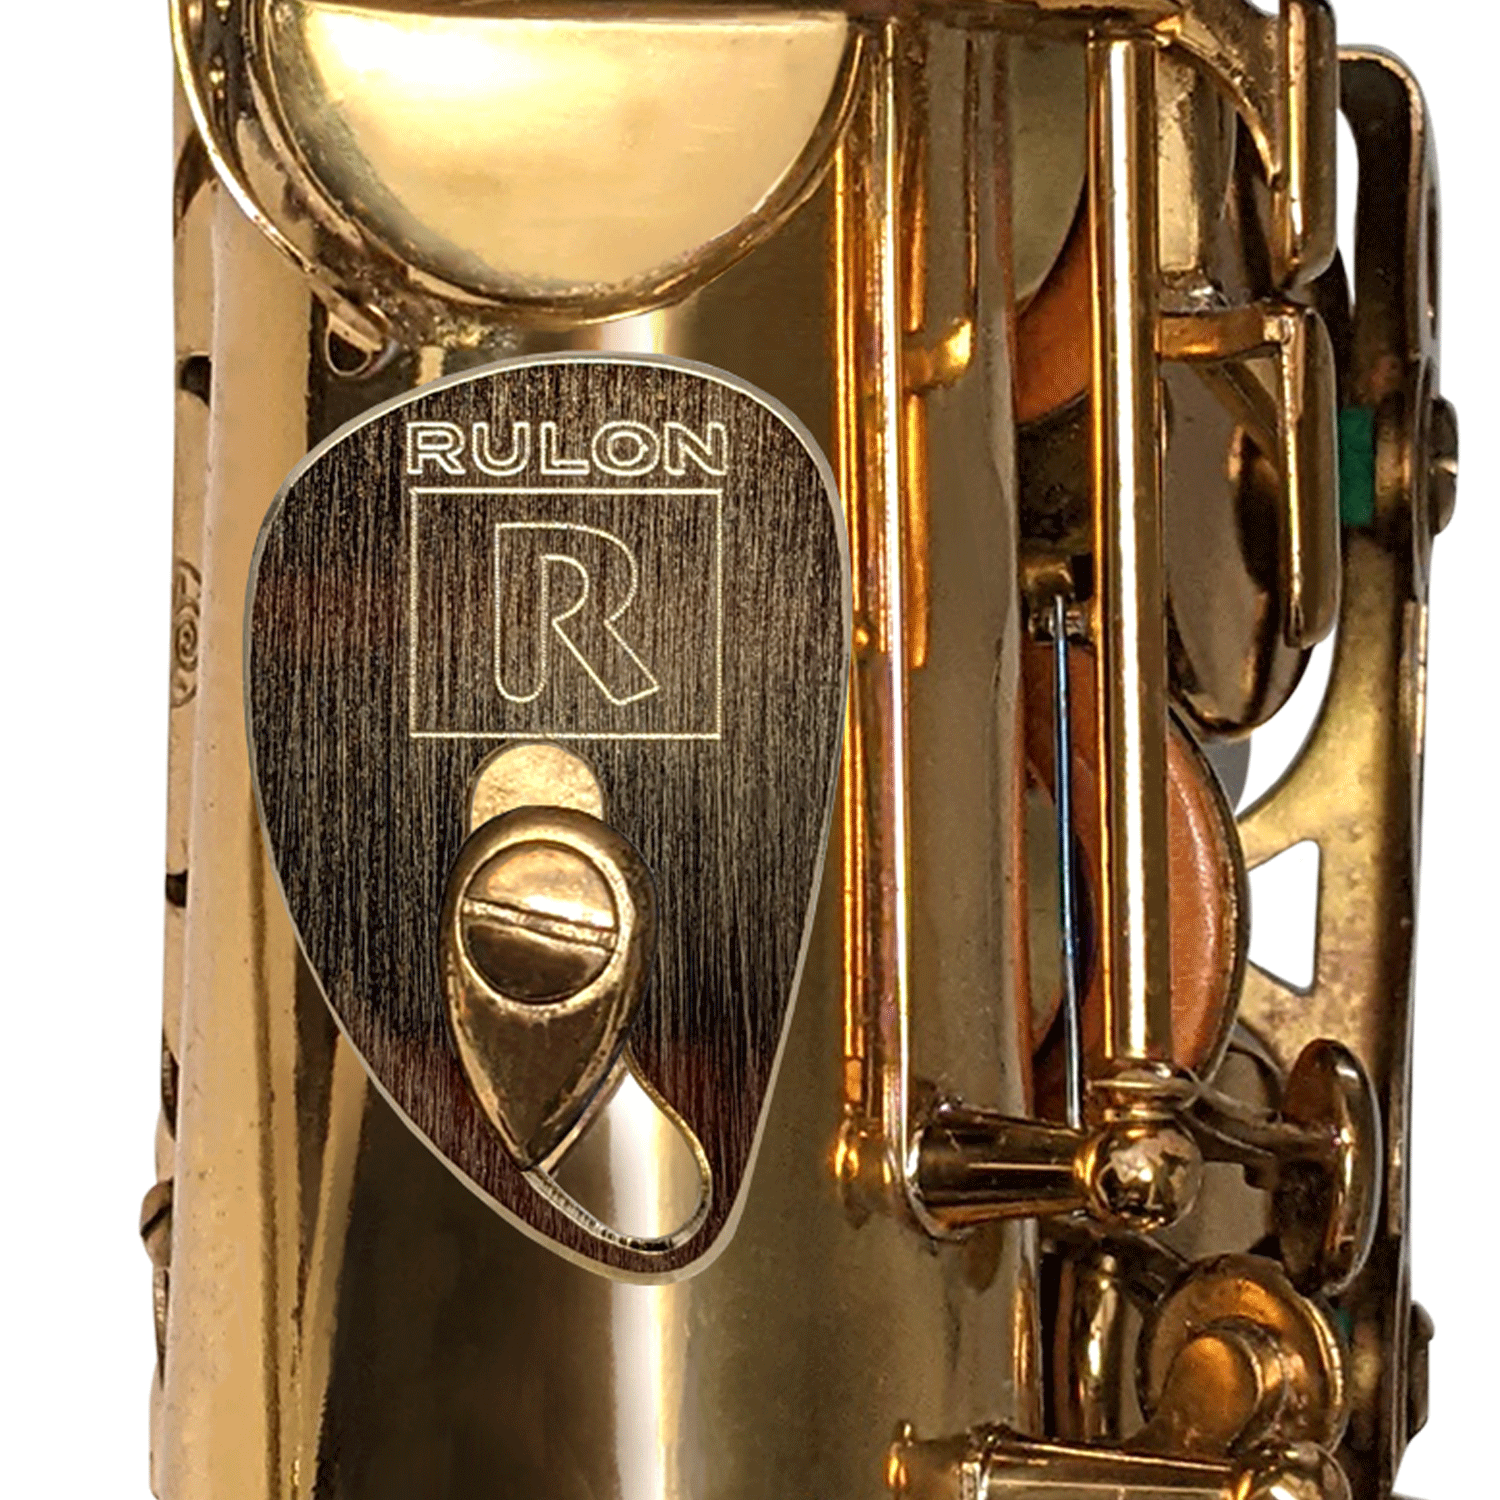 Gold plated RULON saxophone thumb rest replaces the right thumb hook with a flat adjustable plate that is ergonomic and fits any hand large or small.